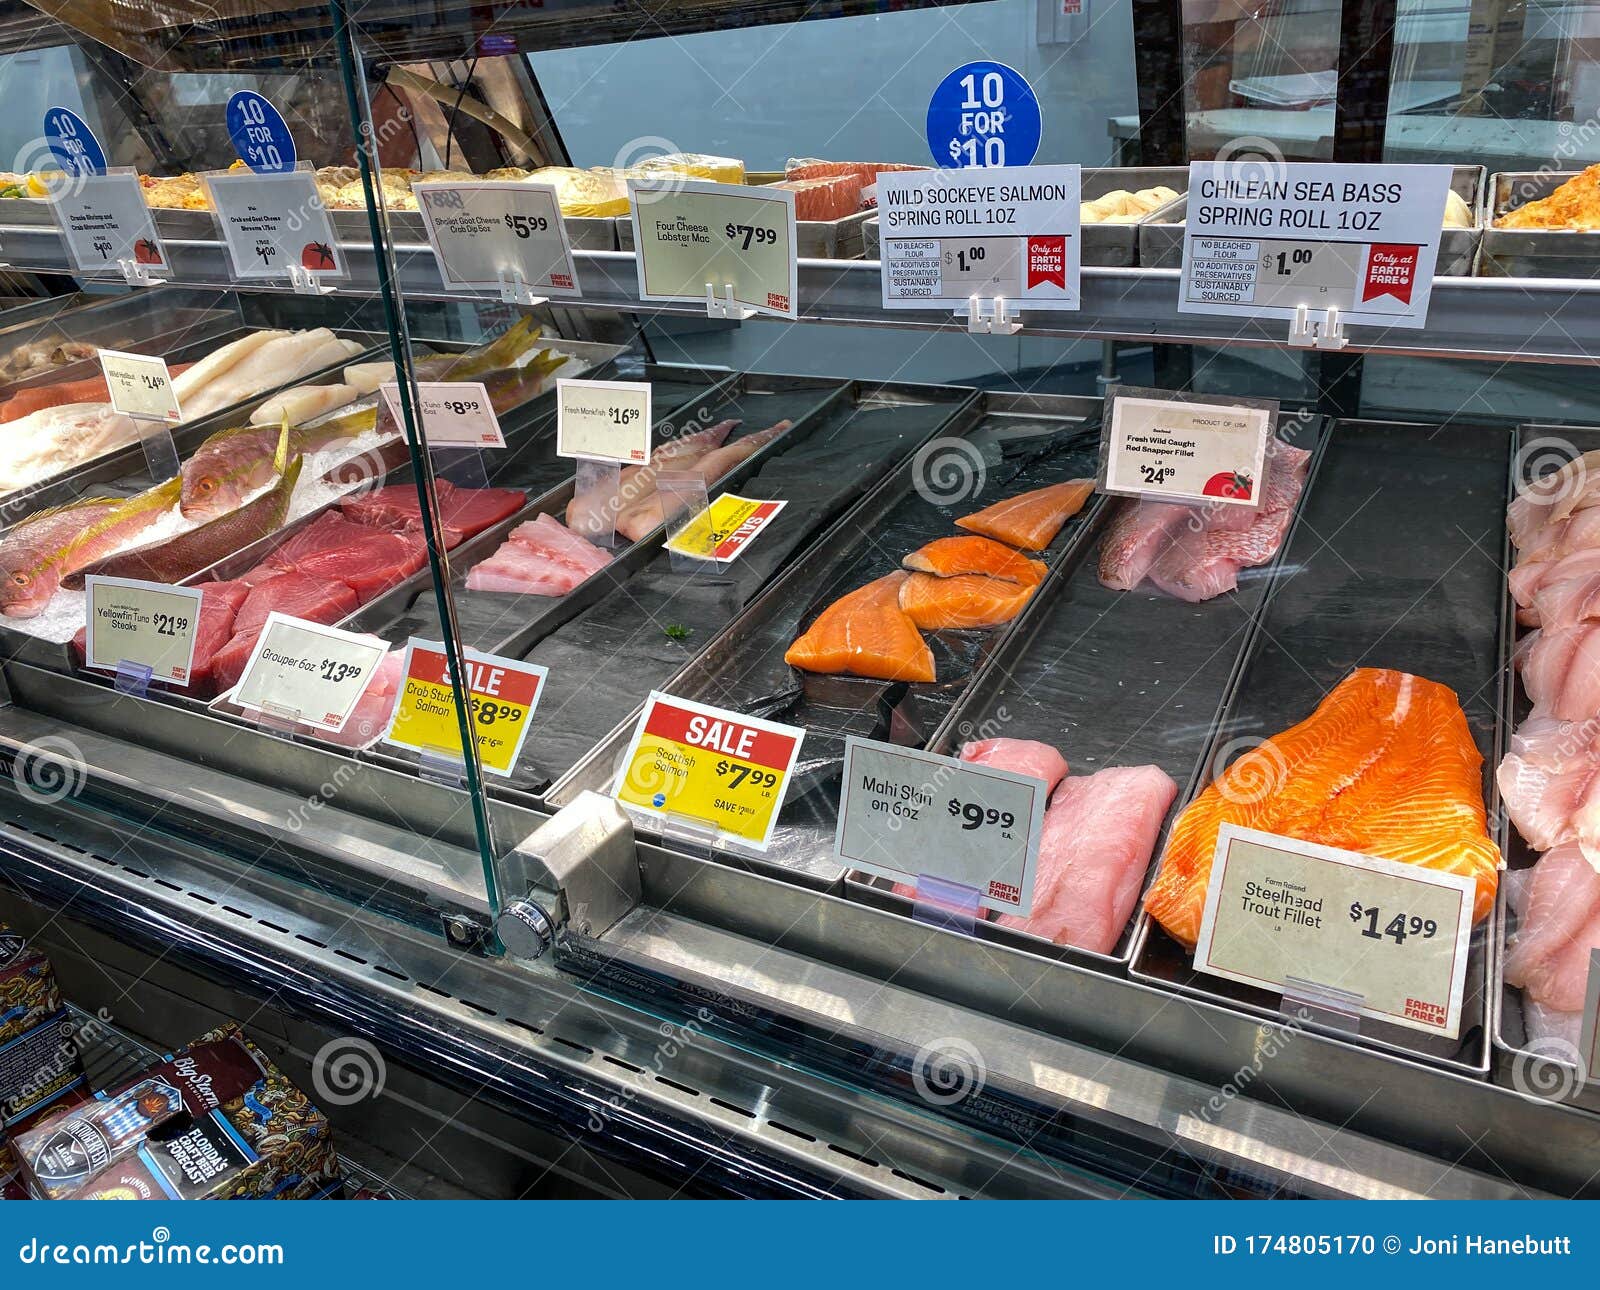 A Display of a Variety of Fish in a Refrigerated Case at a Grocery Store  Editorial Image - Image of mall, business: 174805170